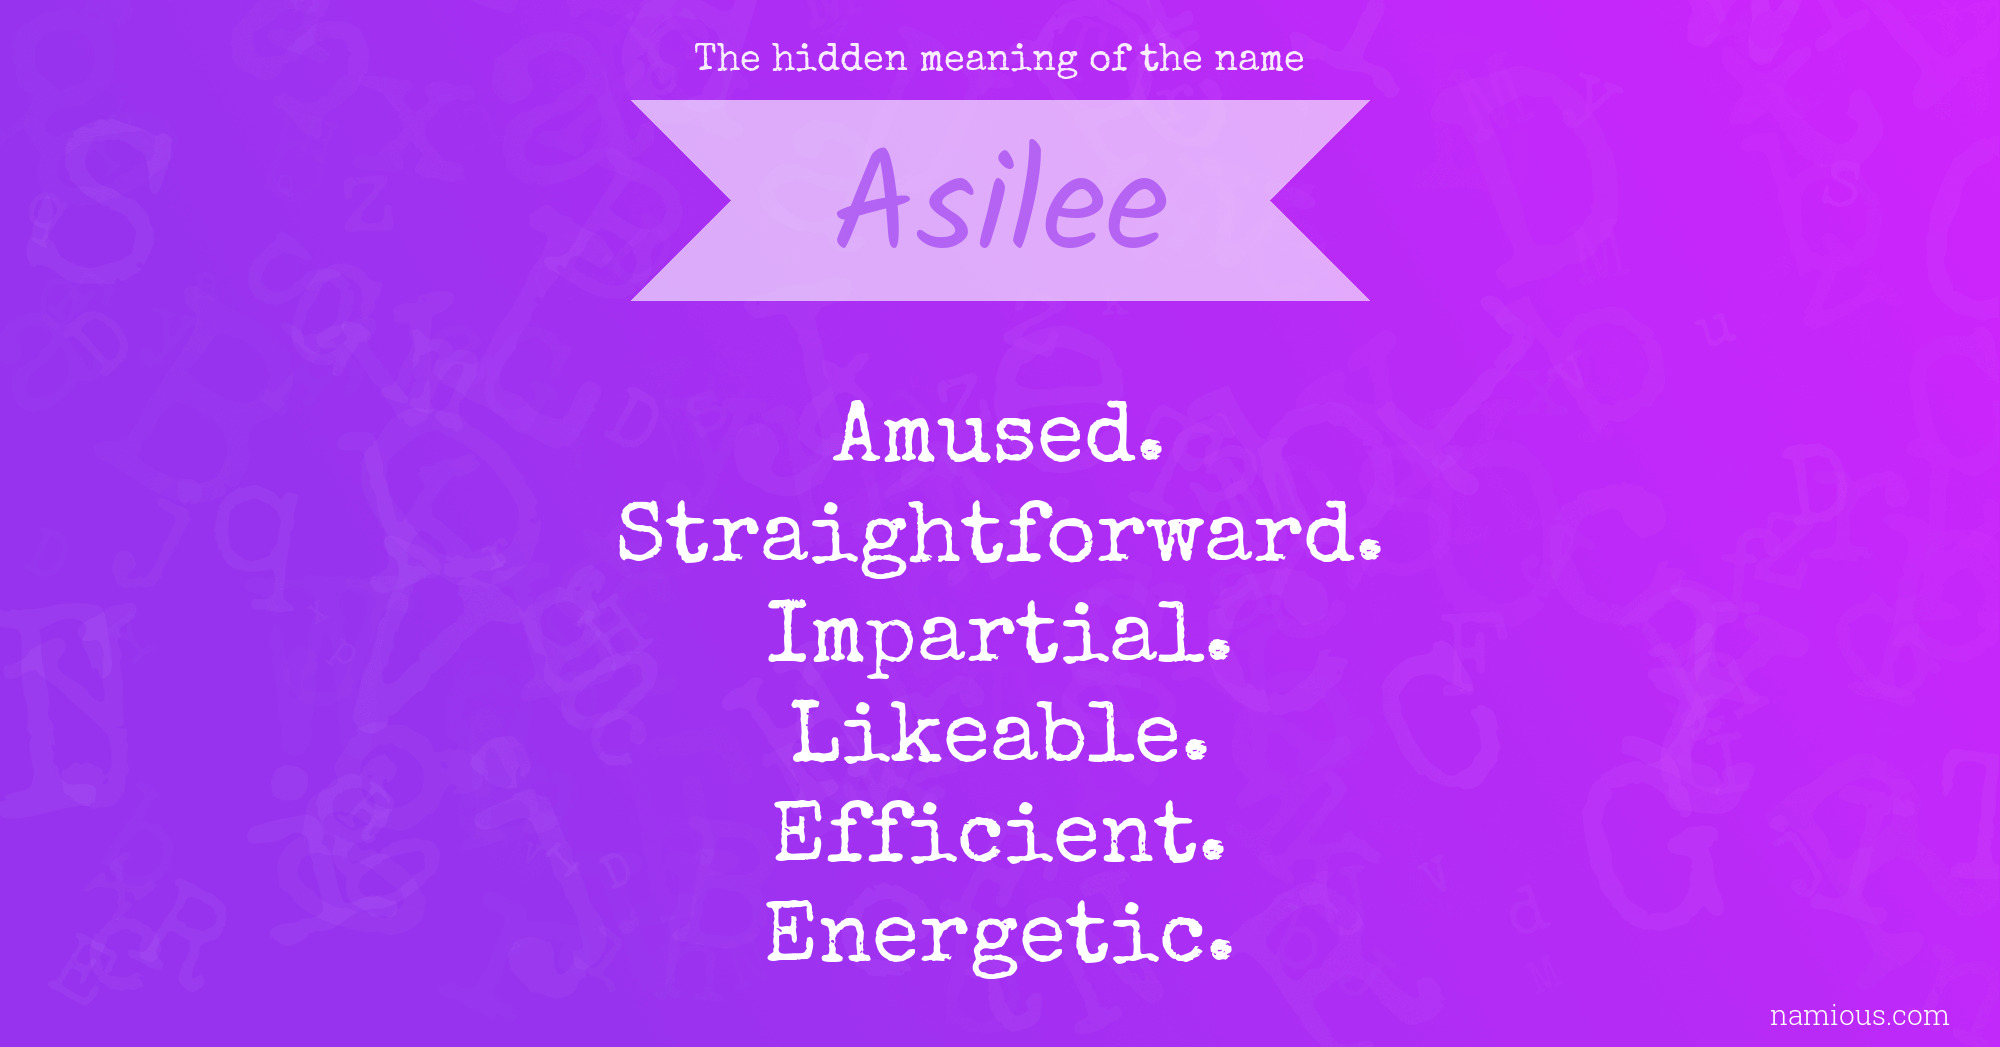 The hidden meaning of the name Asilee